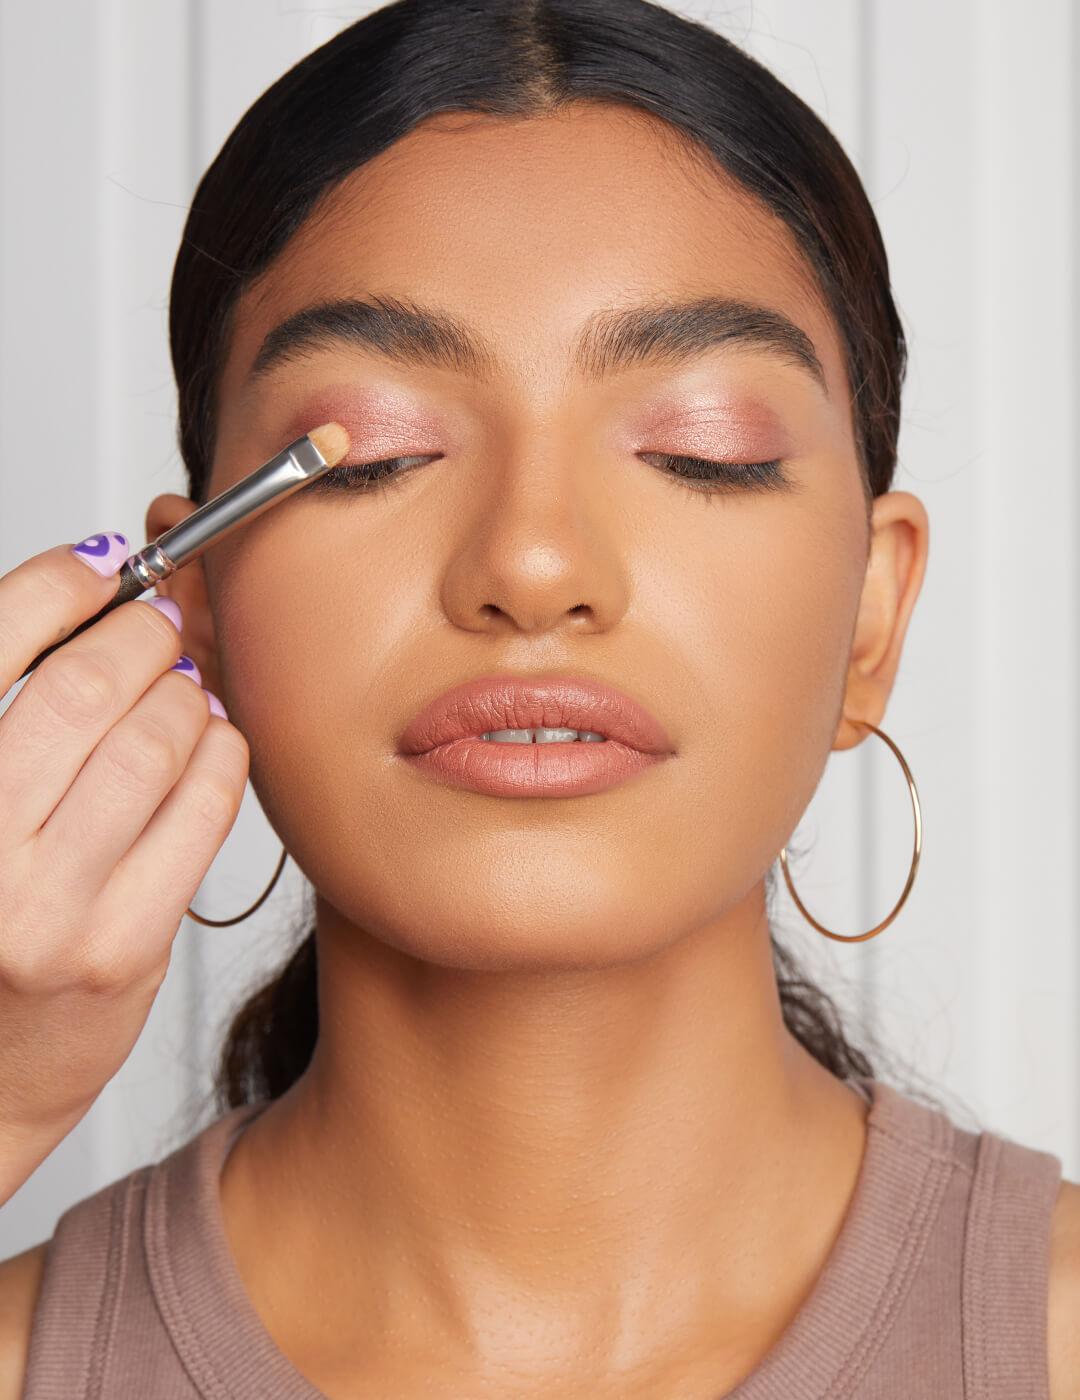 Close-up image of a makeup artist's hand using a makeup brush and applying shimmery rose gold eyeshadow on model's eyelid